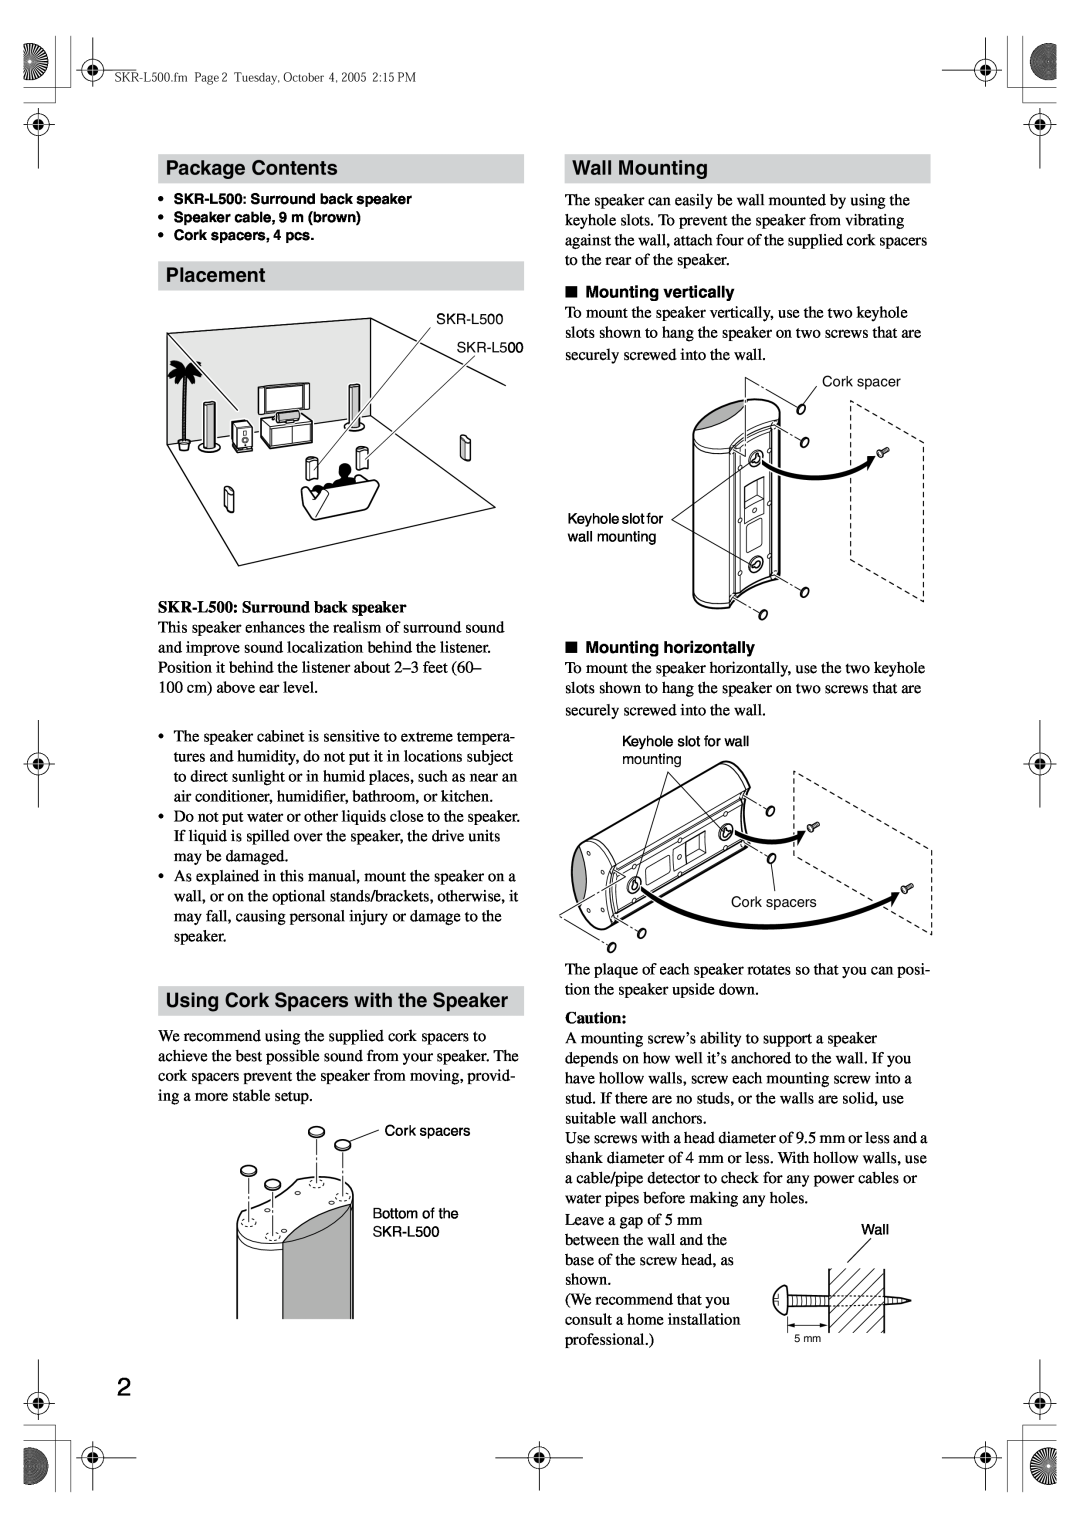 Onkyo SKR-L500 instruction manual Package Contents, Placement, Using Cork Spacers with the Speaker, Wall Mounting 